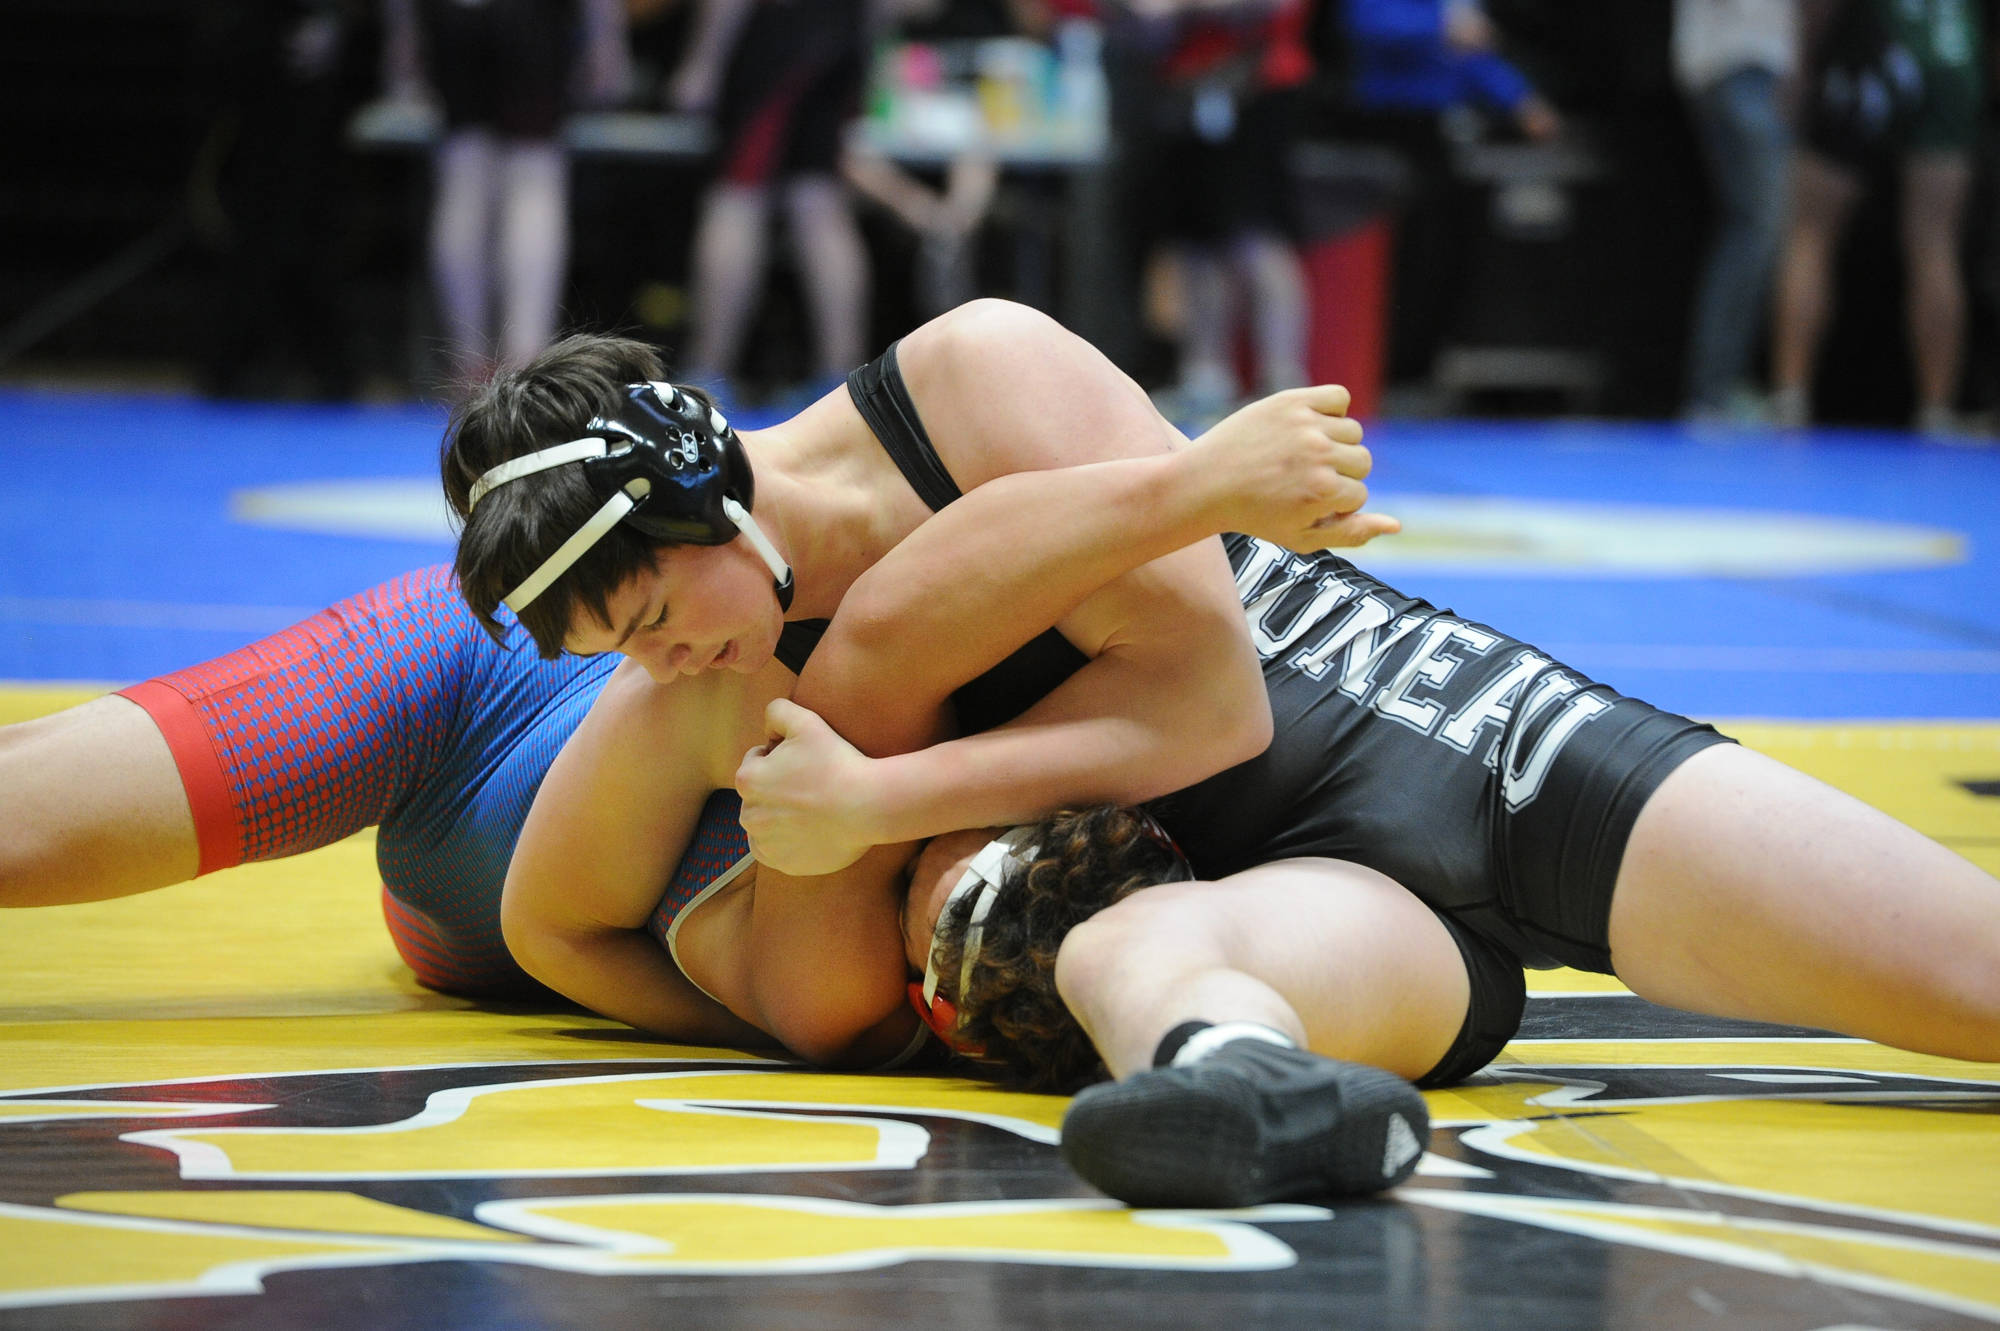 Thunder Mountain High School sophomore Jacob Ferster pins East Anchorage’s Ikaska Vaivai in the second round of the 215-pound consolation bracket of the ASAA/First National Bank Alaska Division I State Wrestling Championships at the Alaska Airlines Center in Anchorage on Saturday, Dec. 15, 2018. (Michael Dinneen | For the Juneau Empire)